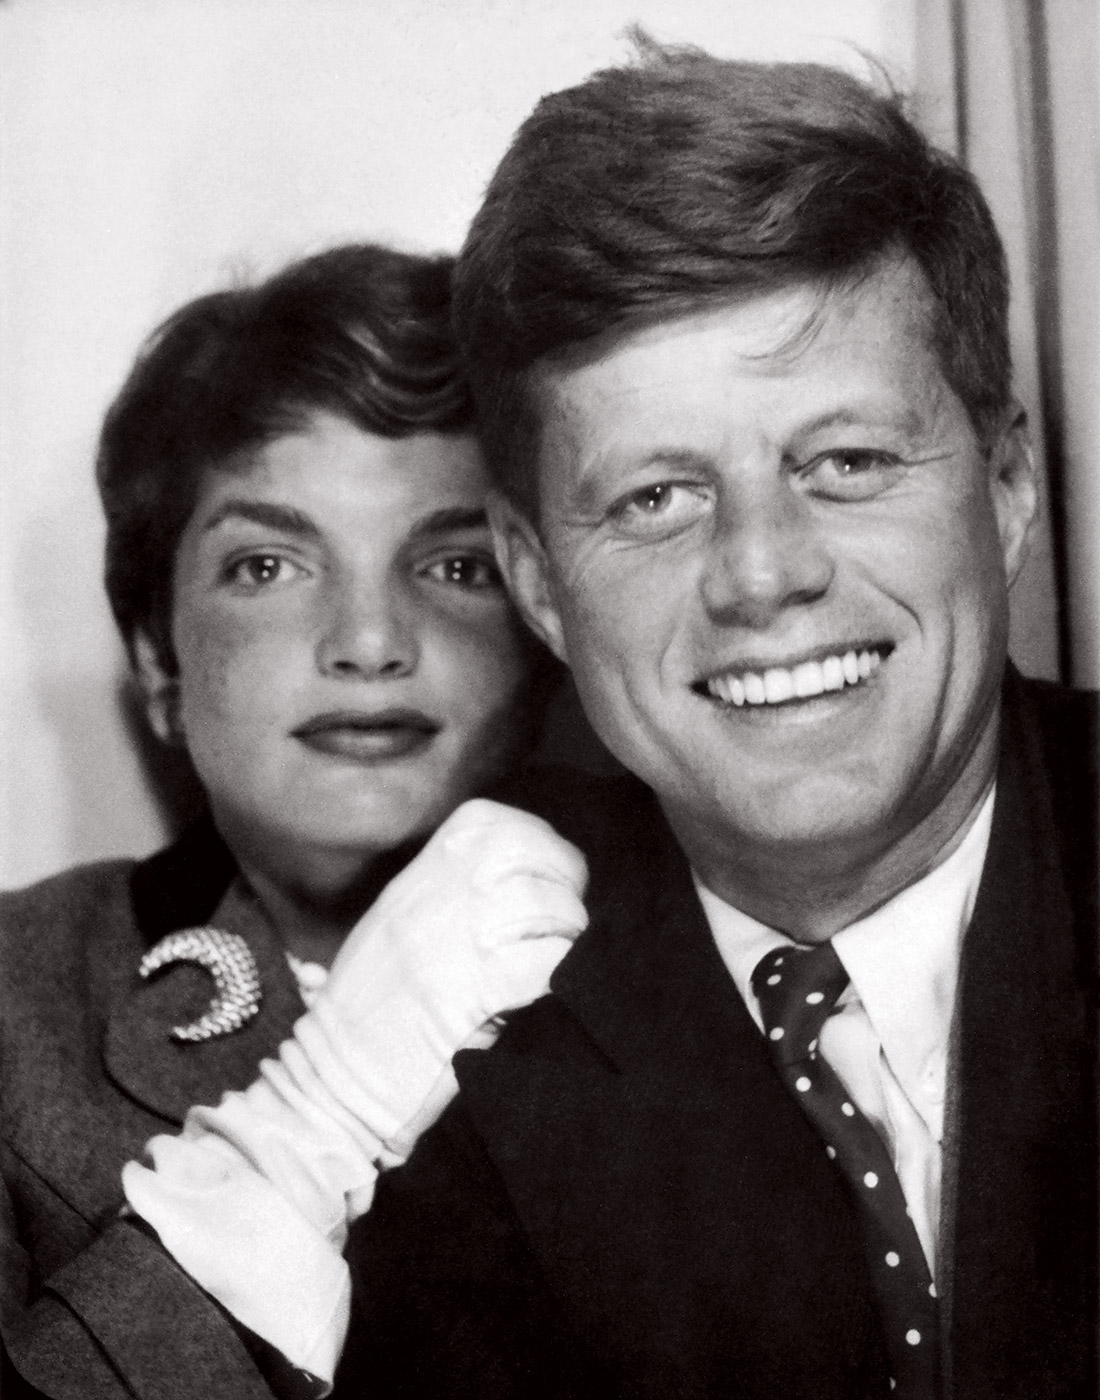 Photo booth portrait, 1953. (Courtesy John F. Kennedy Presidential Library and Museum).